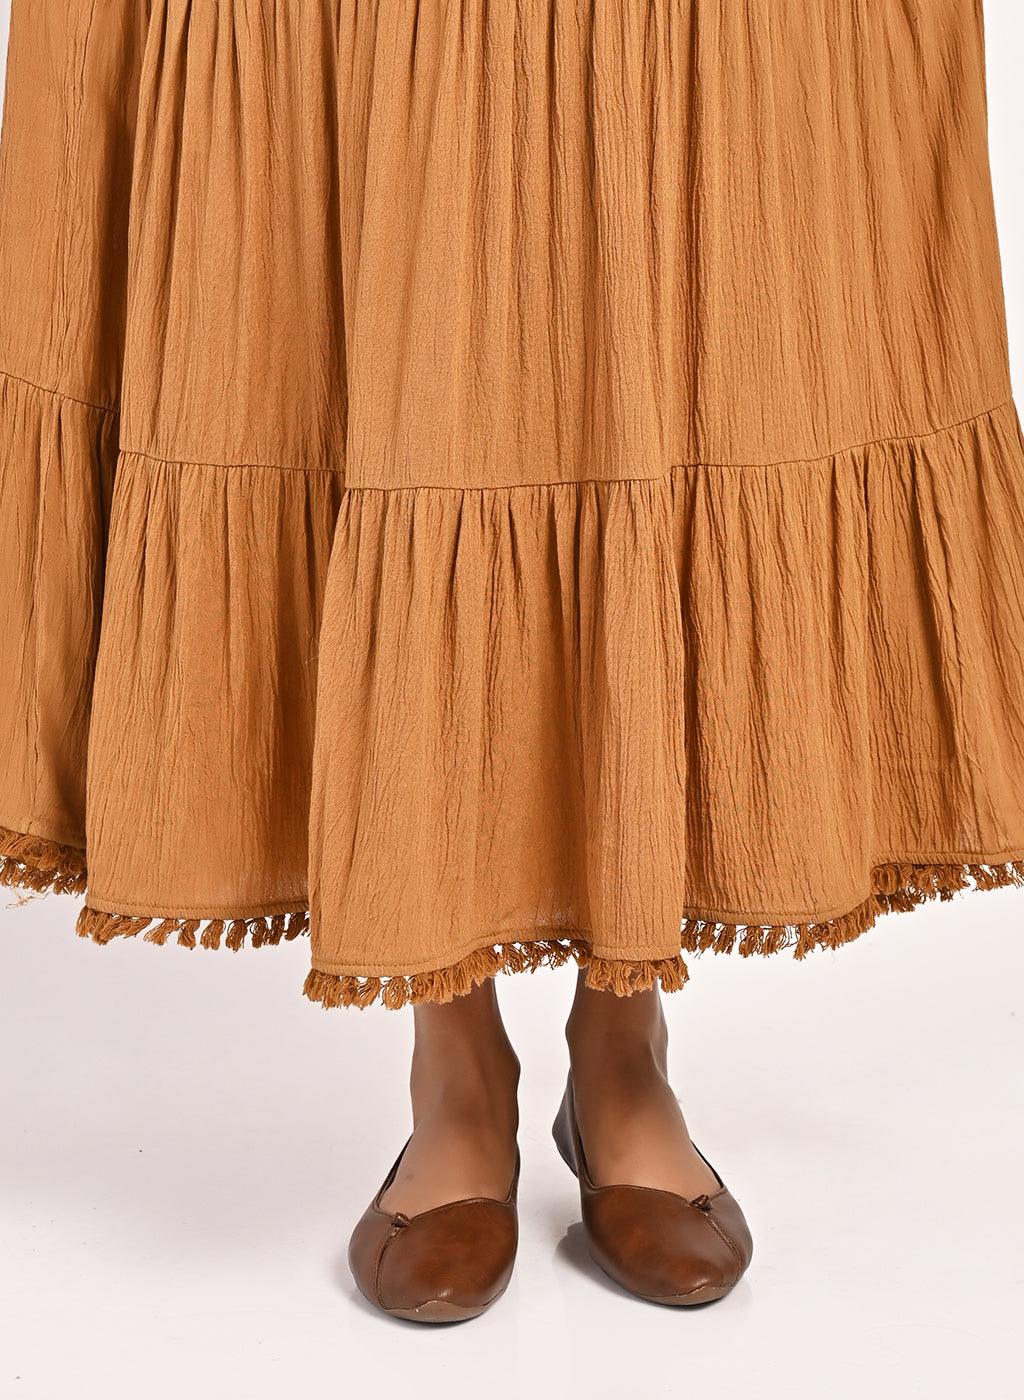 Spicy Mustard Long Dress for Women with Dori Detail and Embroidery - Lakshita